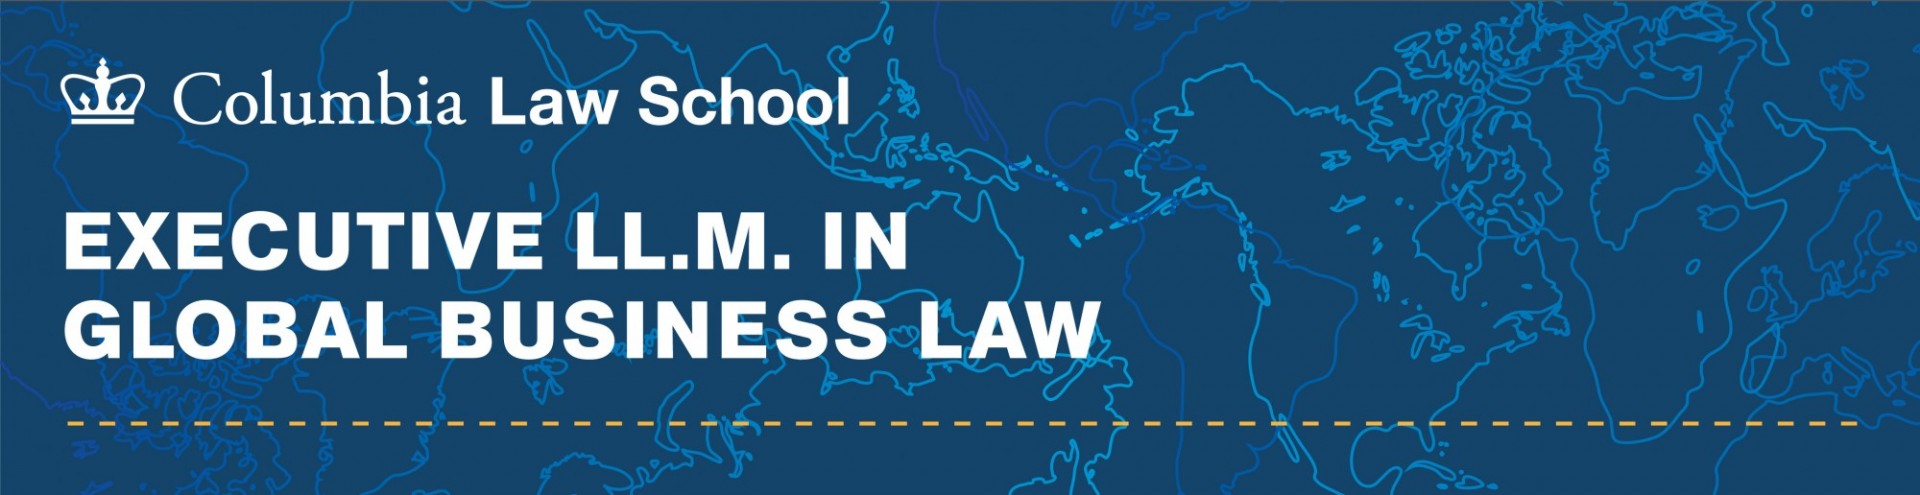 Columbia Executive LL.M. in Global Business Law